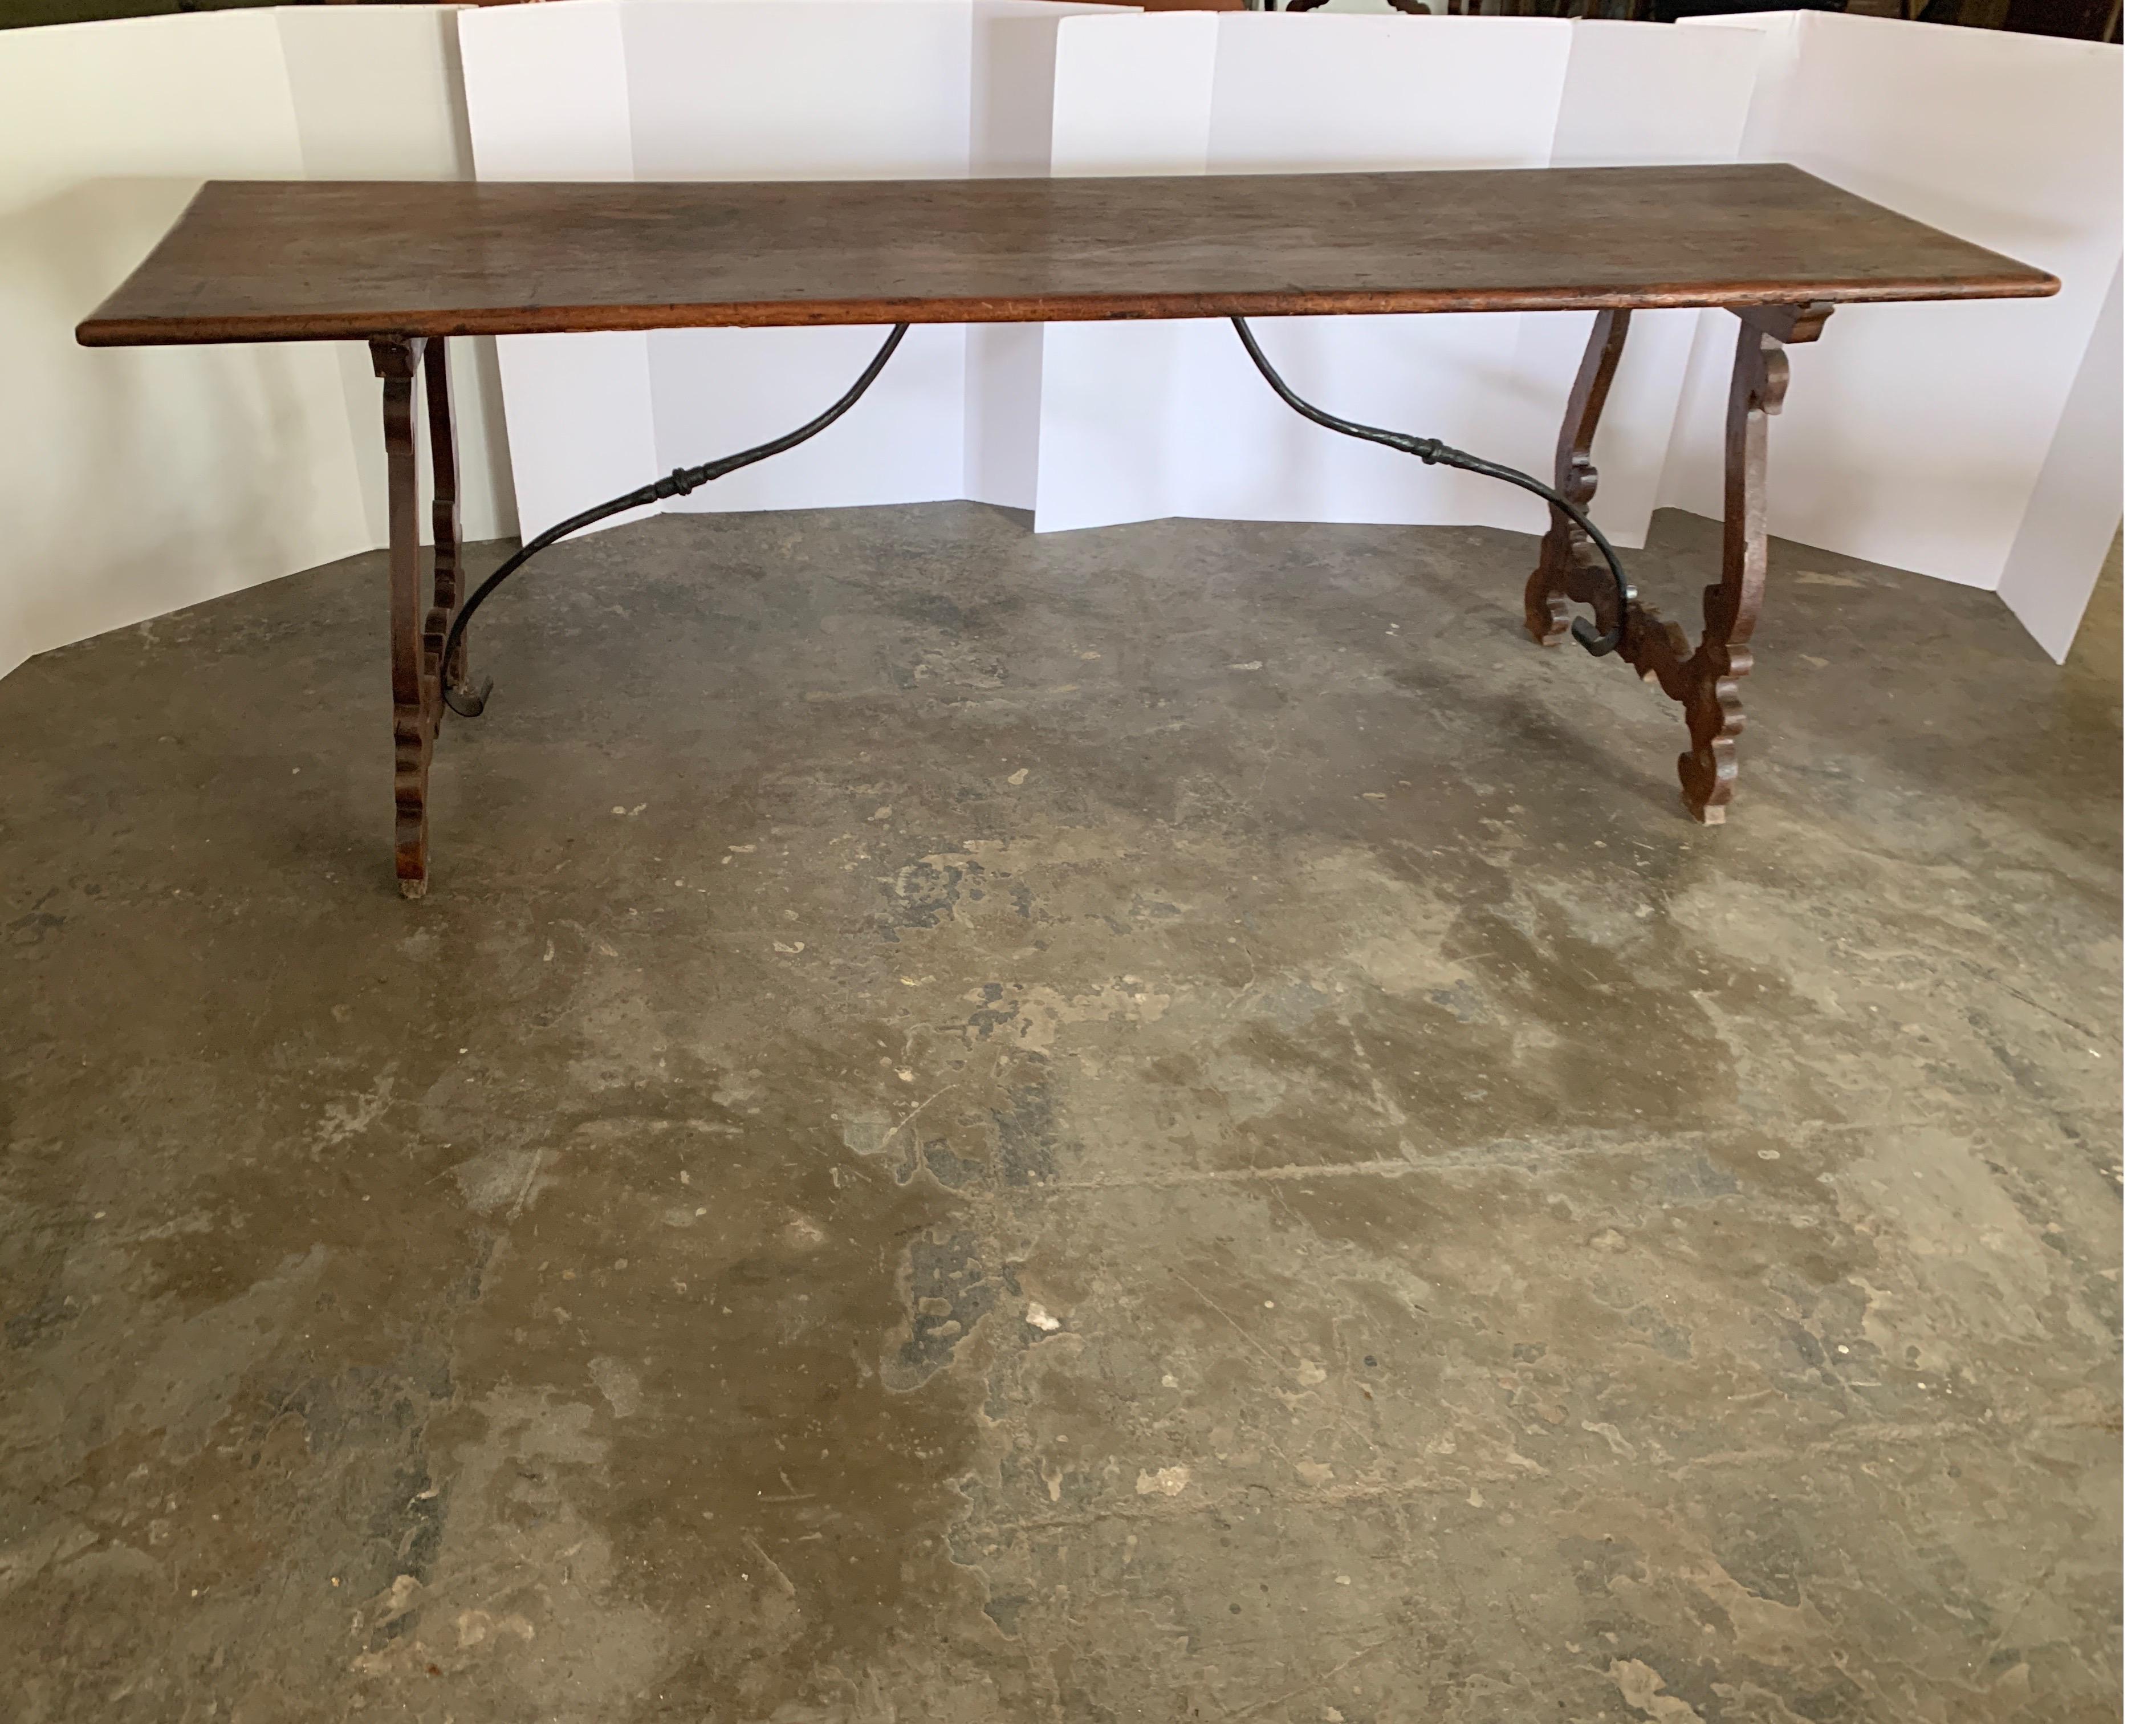 Handsome dark walnut narrow table from Italy with a beautiful aged patina. This is also great for a console as it’s only 25 5/8 deep. Could make a wonderful desk without drawers as well.